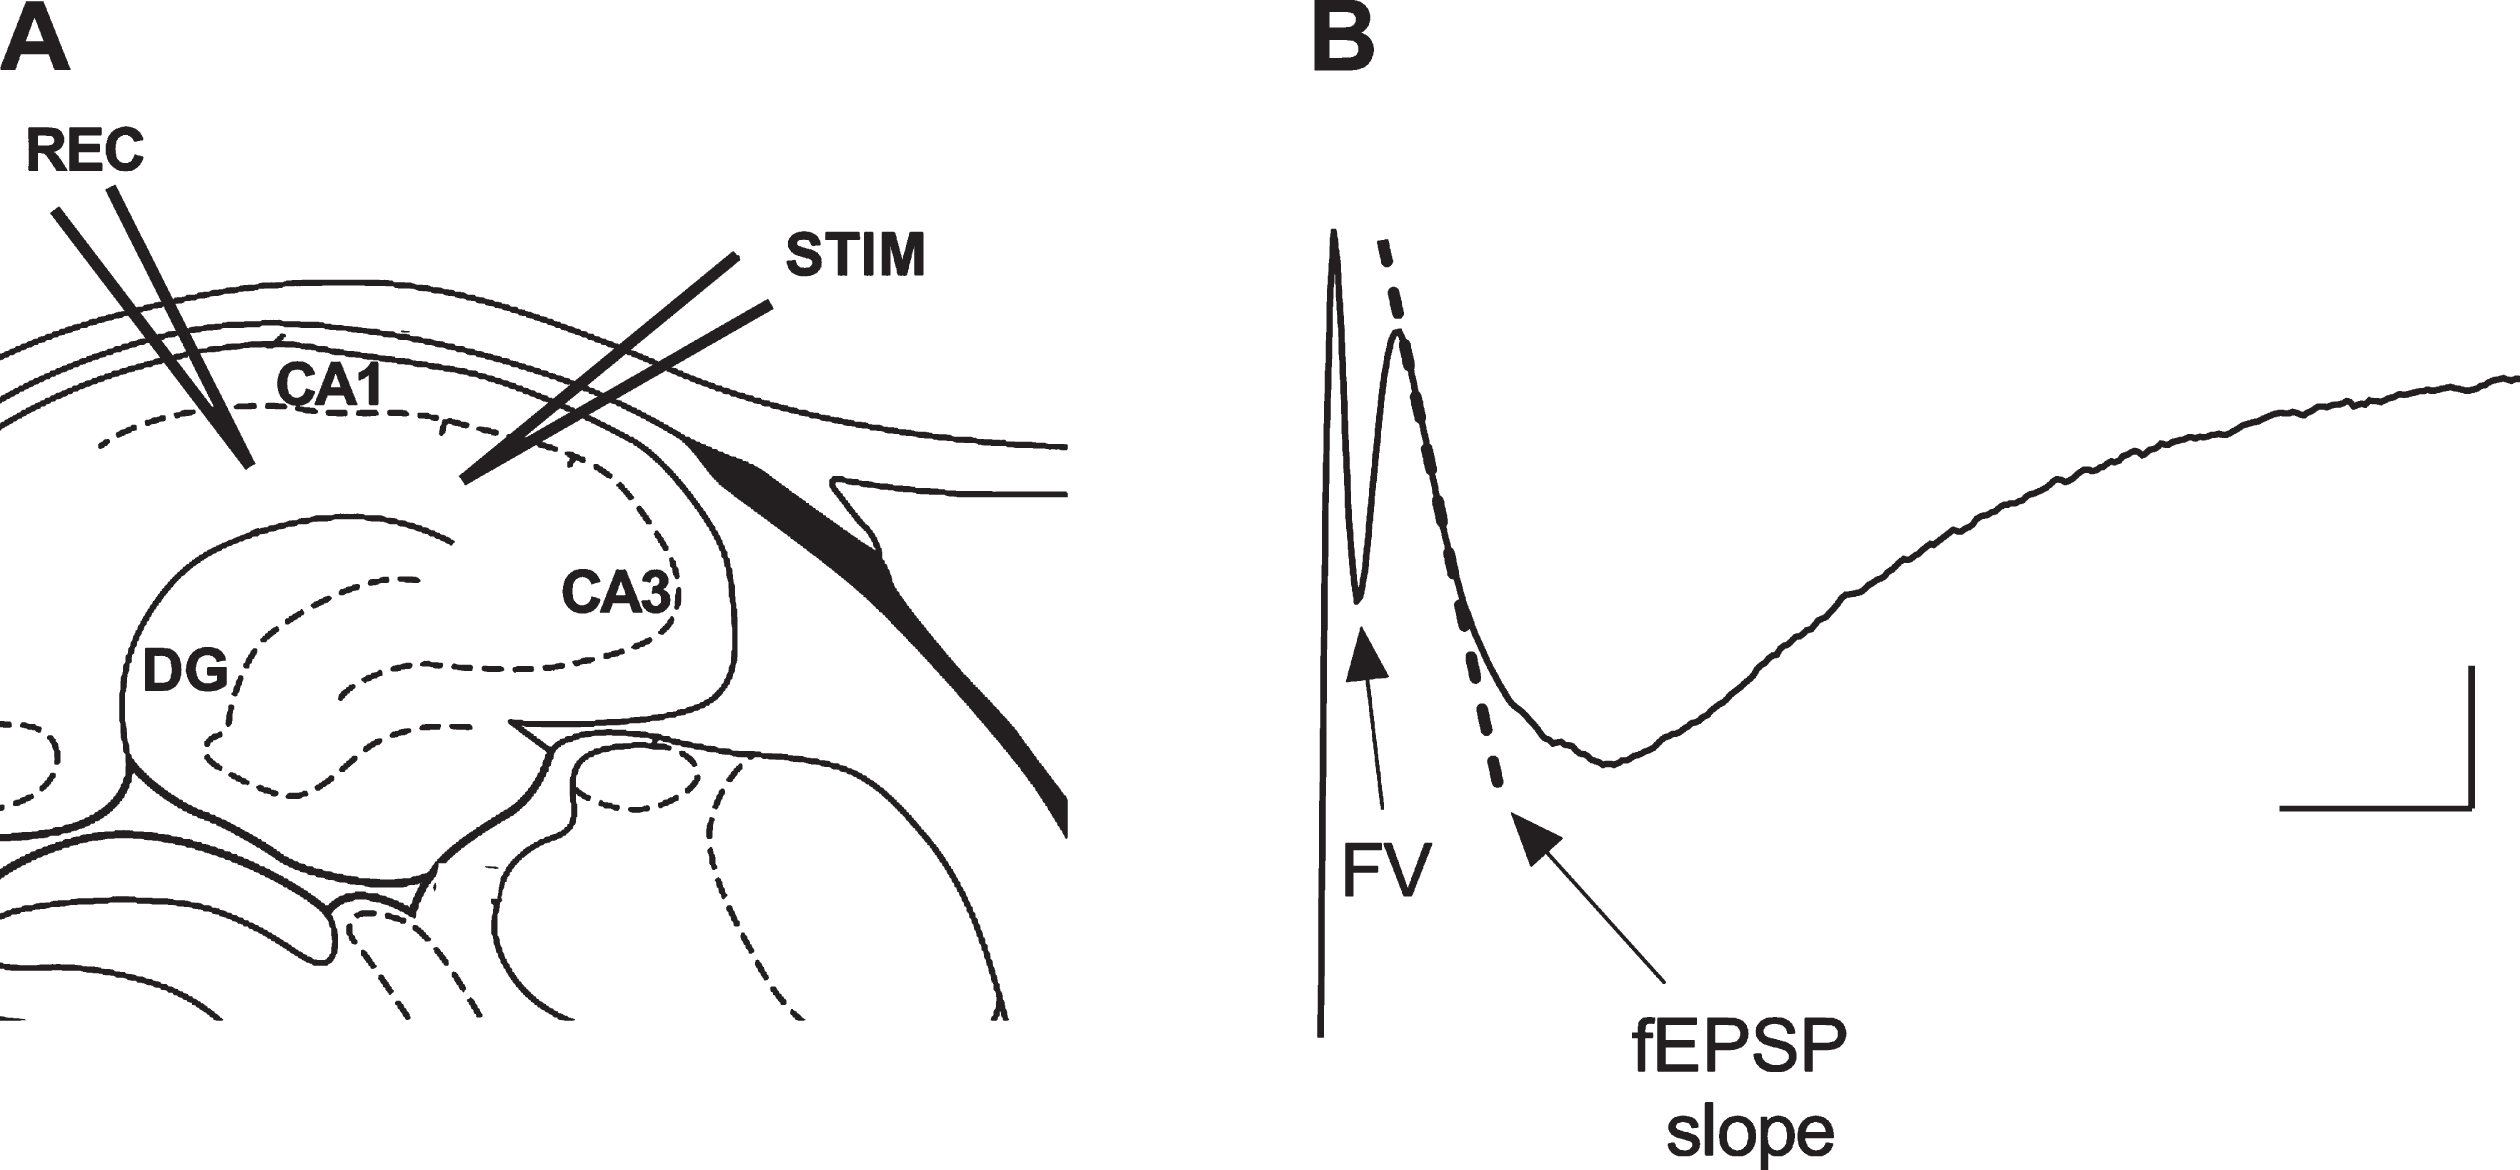 Depiction of the experimental electrophysiological protocol. A) The hippocampal sites of the recording (REC) and stimulating (STIM) electrodes. B) The evoked local field potential signal consisting of fiber volley (FV) and delayed field excitatory post-synaptic potential (fEPSP) components; the dotted line represents the slope of the initial part of the fEPSP used as a measure of synaptic activity in the hippocampal CA1 region. Scale bar: 0.2 mV, 5 ms.